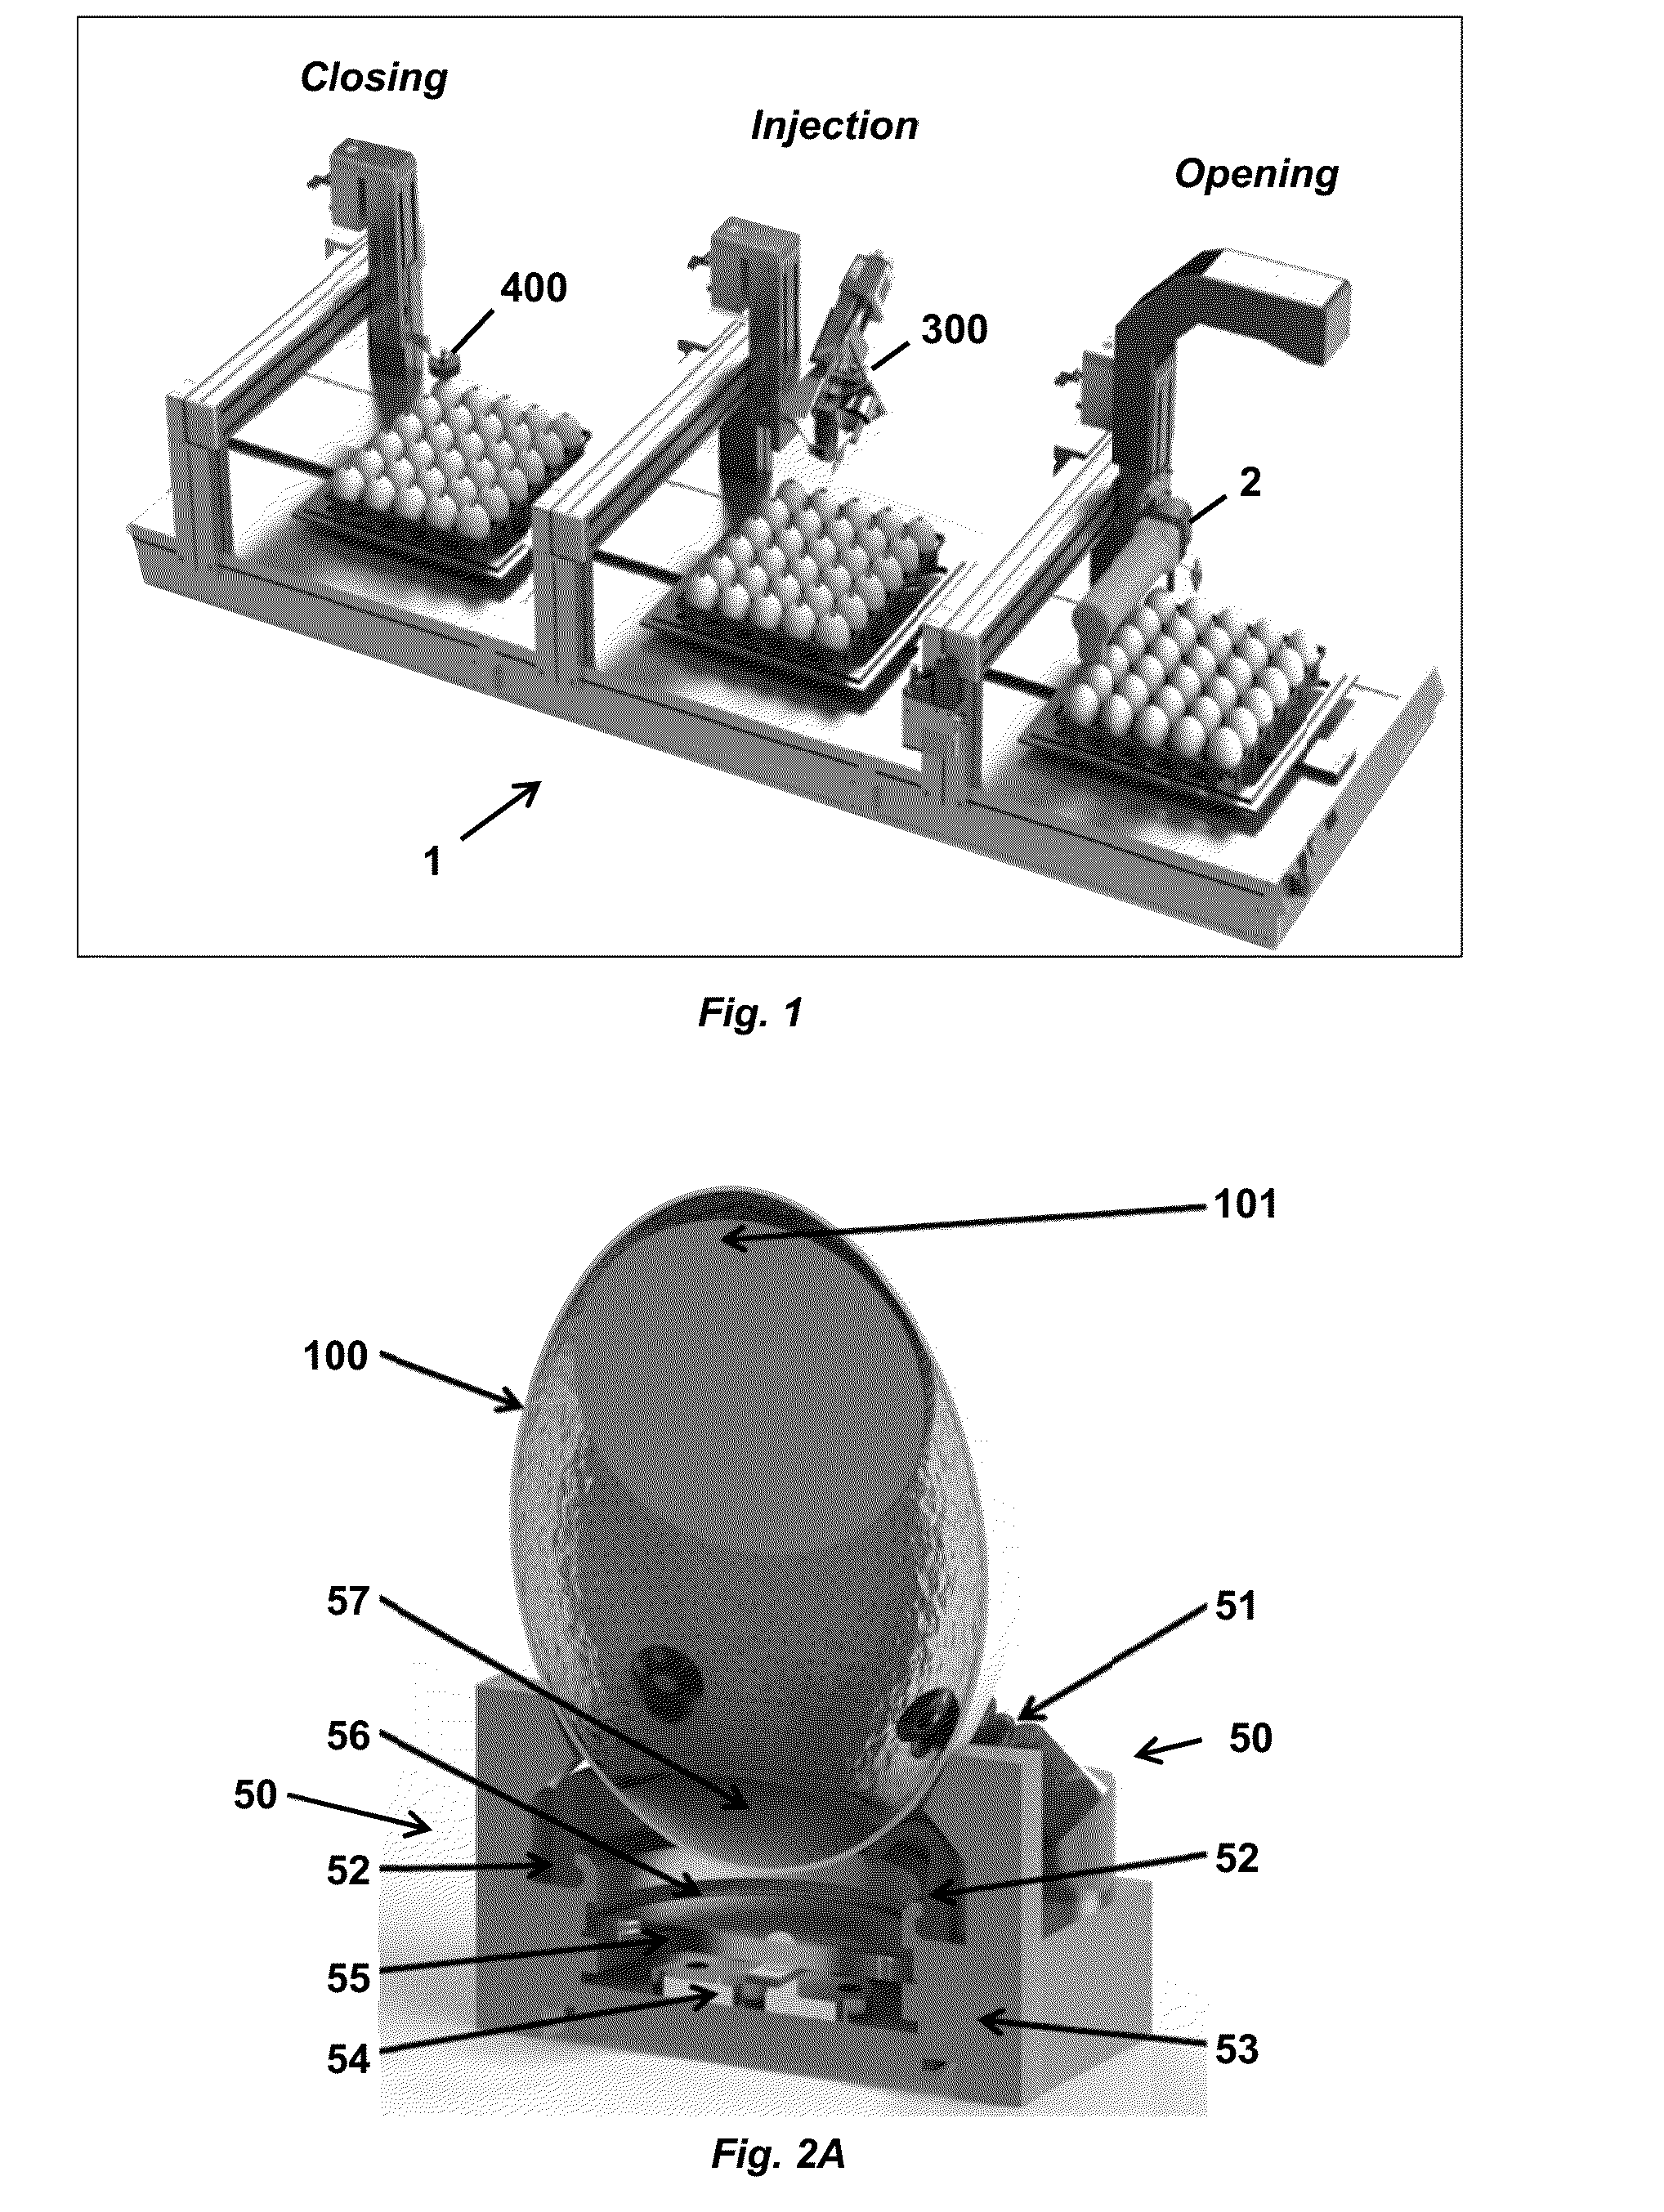 Selective Embryonic Structure Targeting and Substance Delivery Device